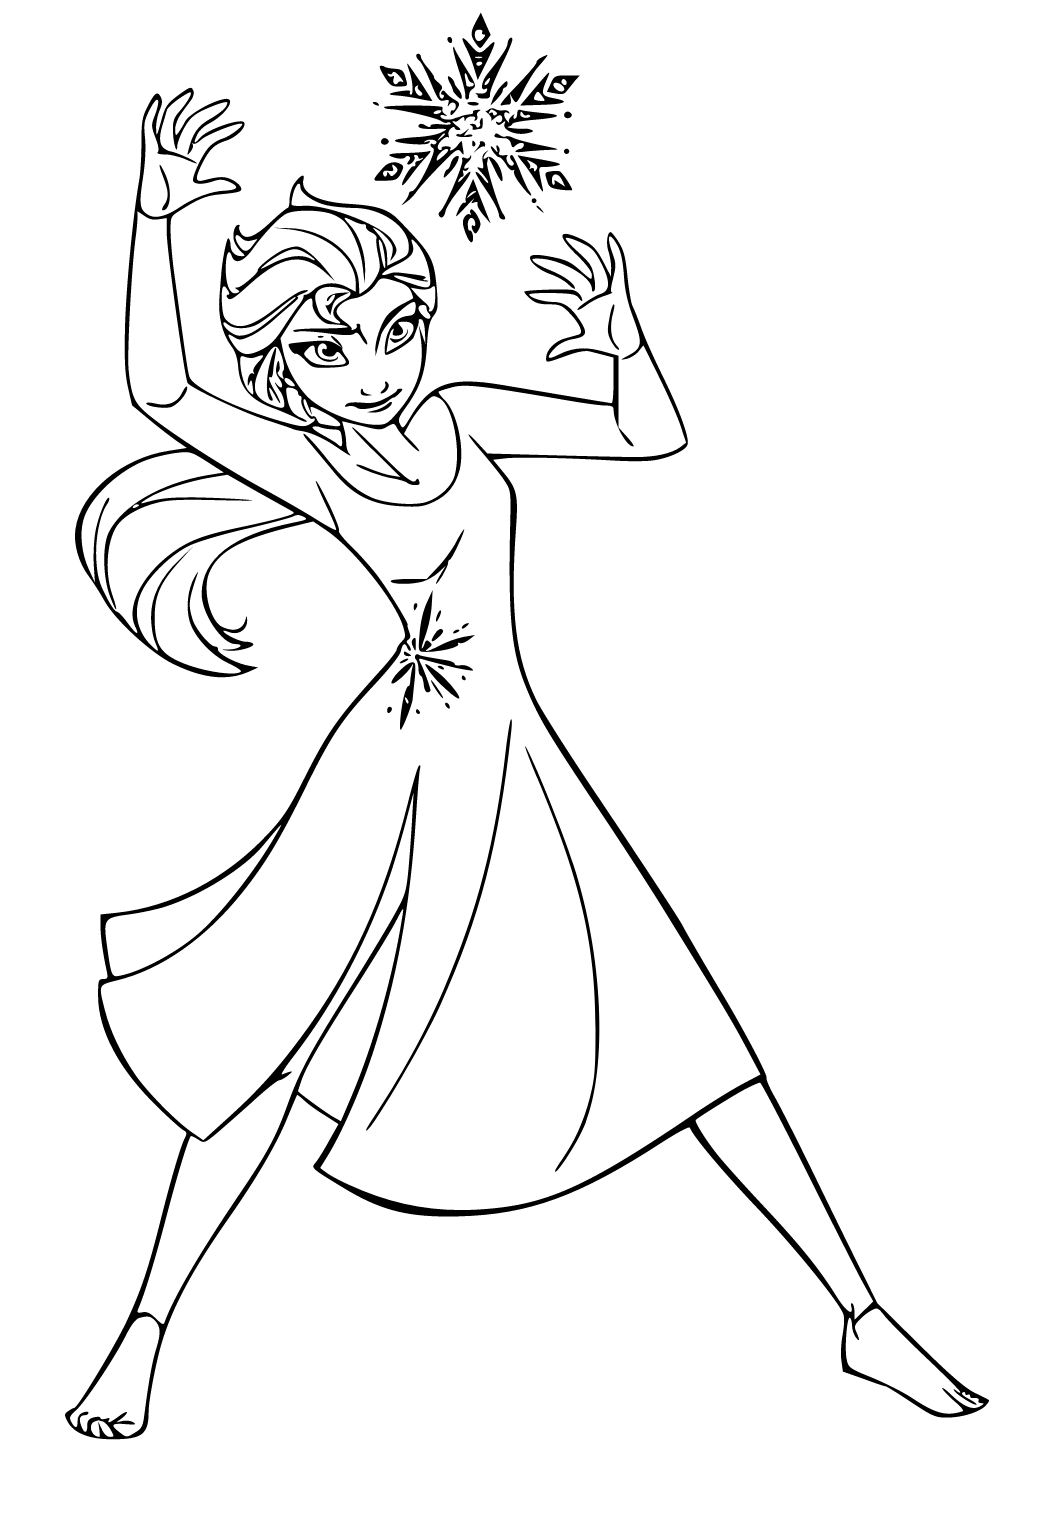 Free printable frozen magic coloring page for adults and kids